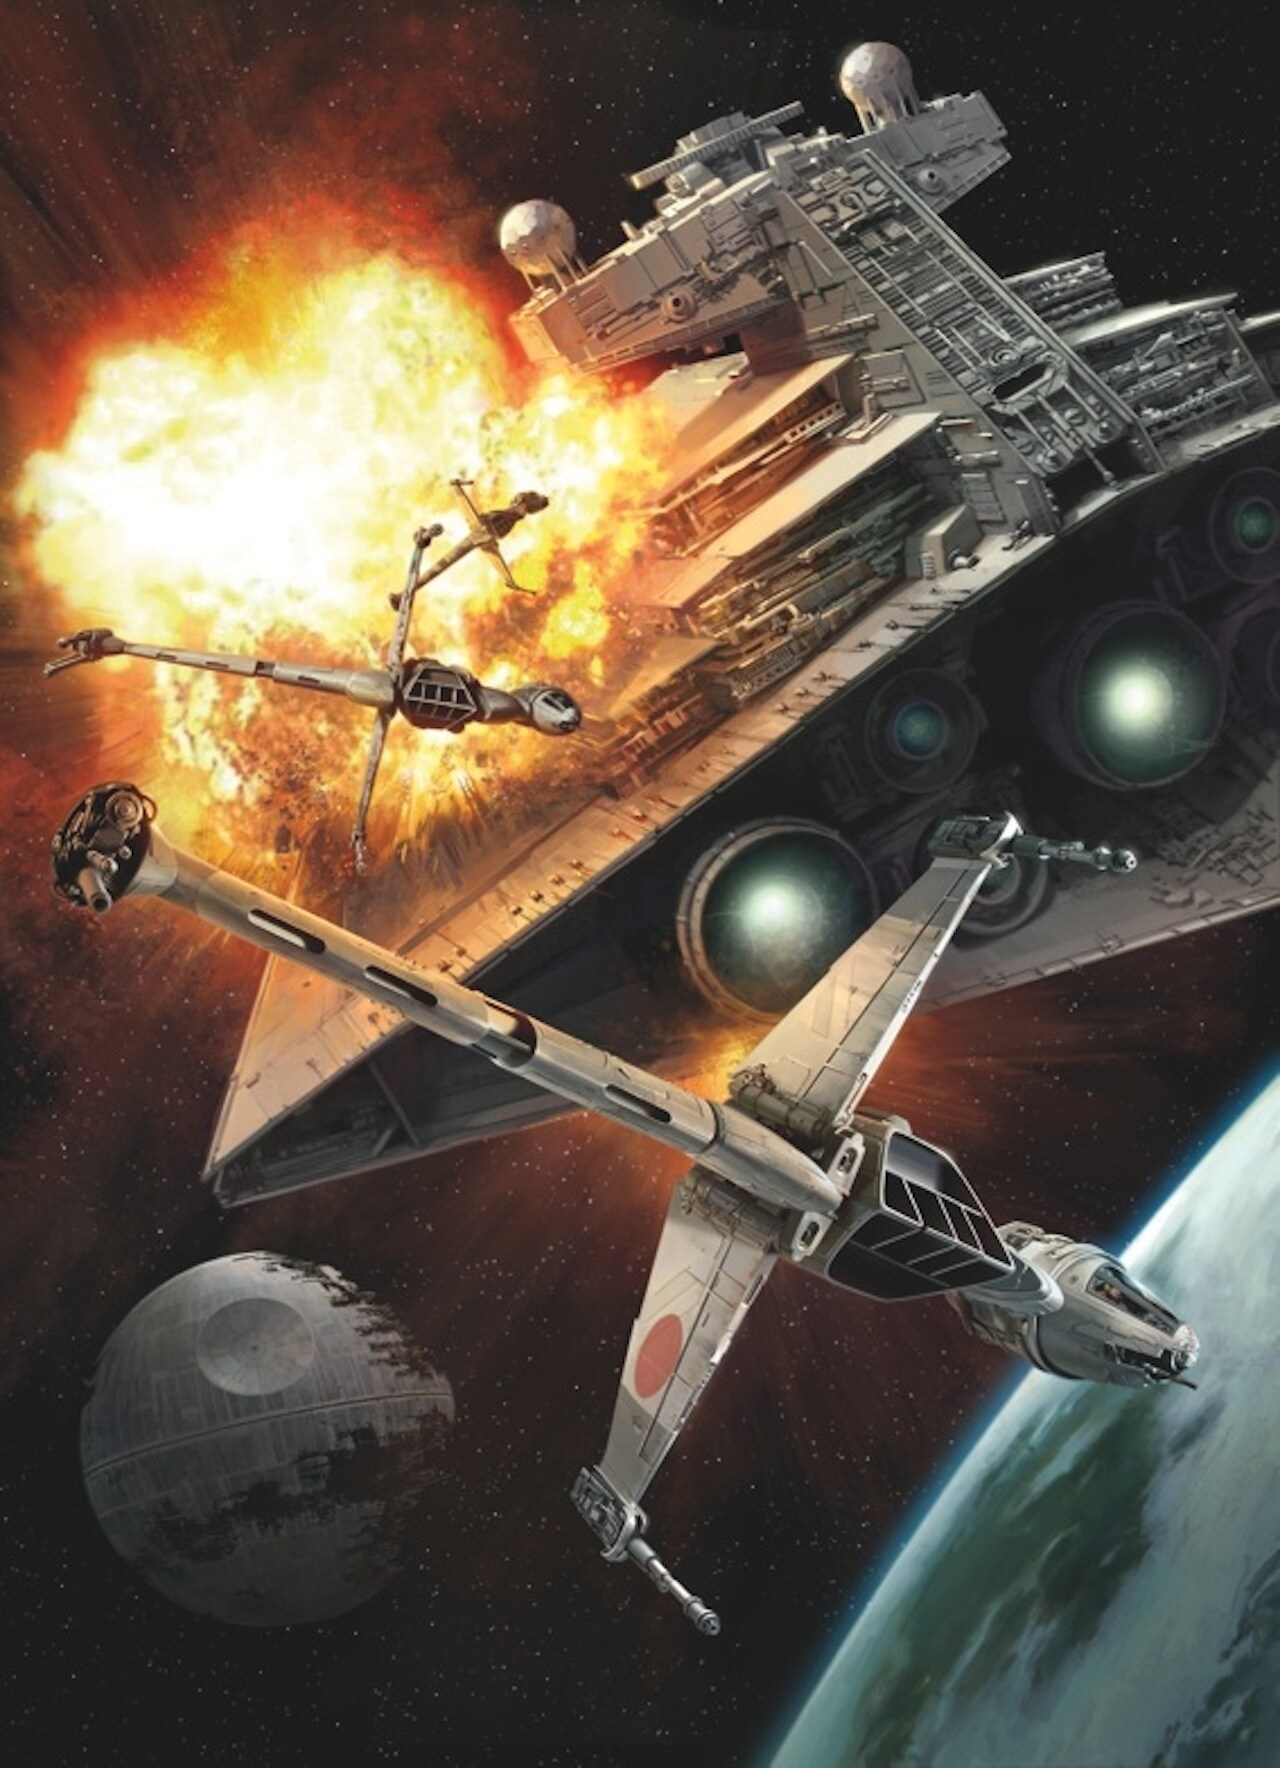 The B-wing’s advanced targeting systems allowed pilots to sync attacks so multiple fighters could...